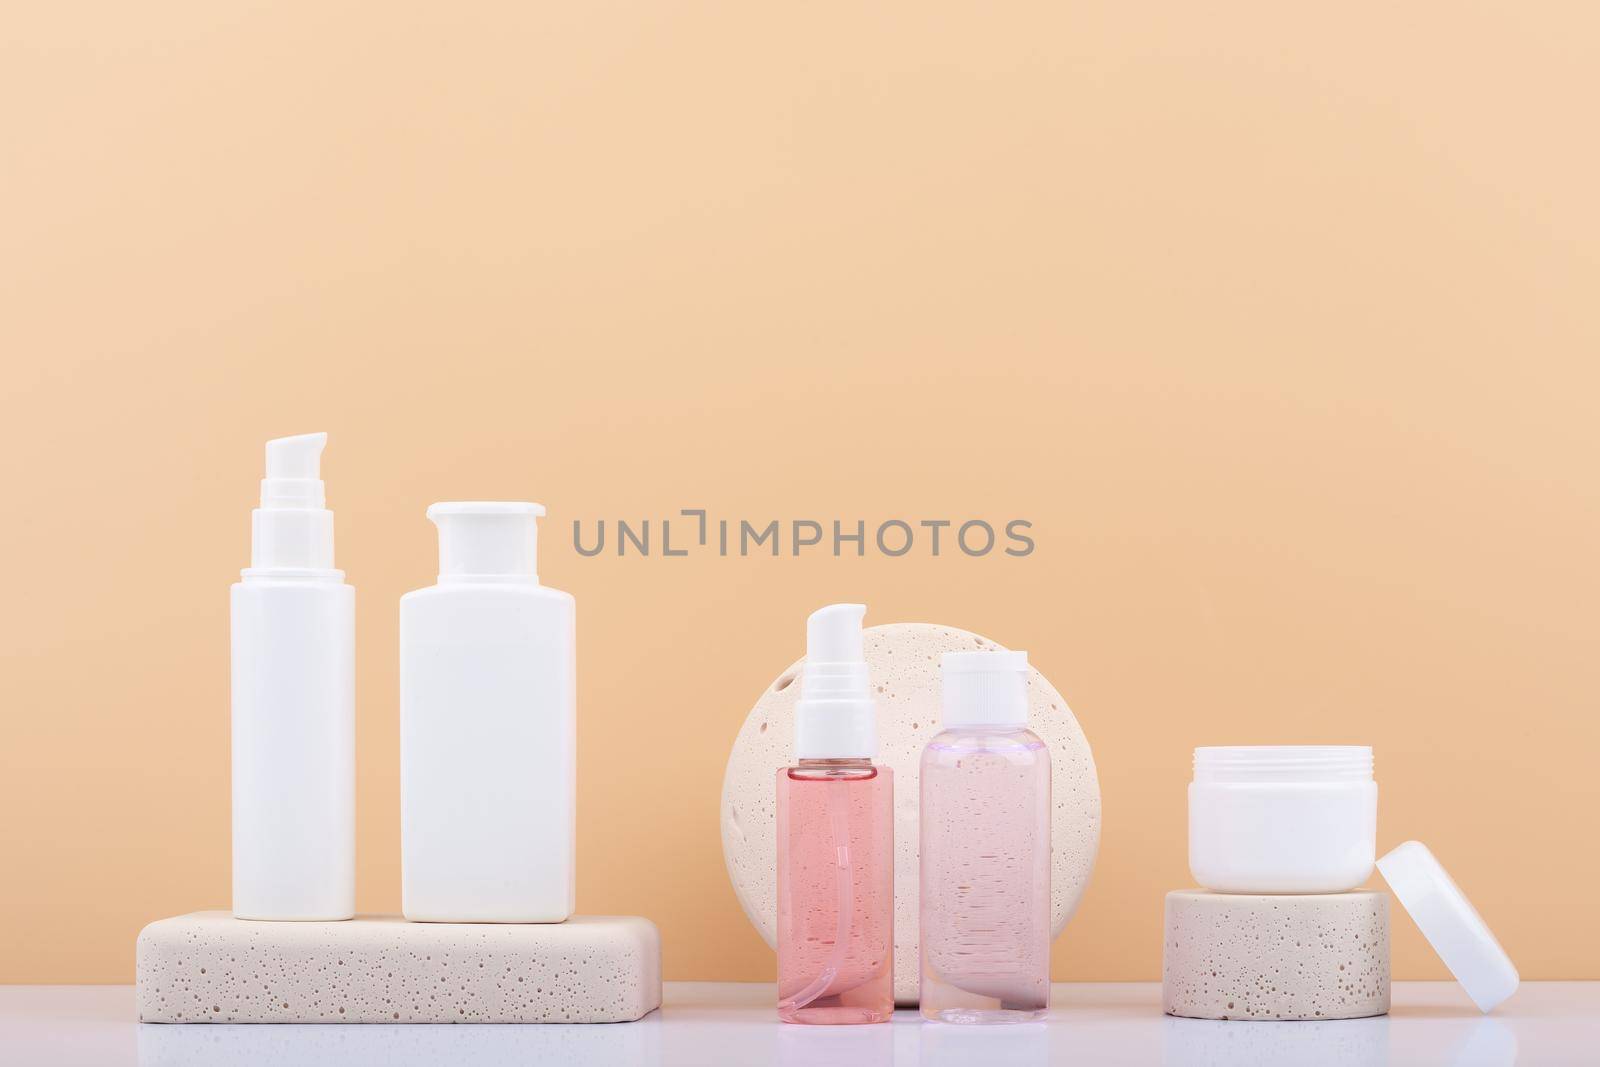 Set of skin care products on neutral stone podiums against beige background with copy space. Concept of daily skin care  by Senorina_Irina